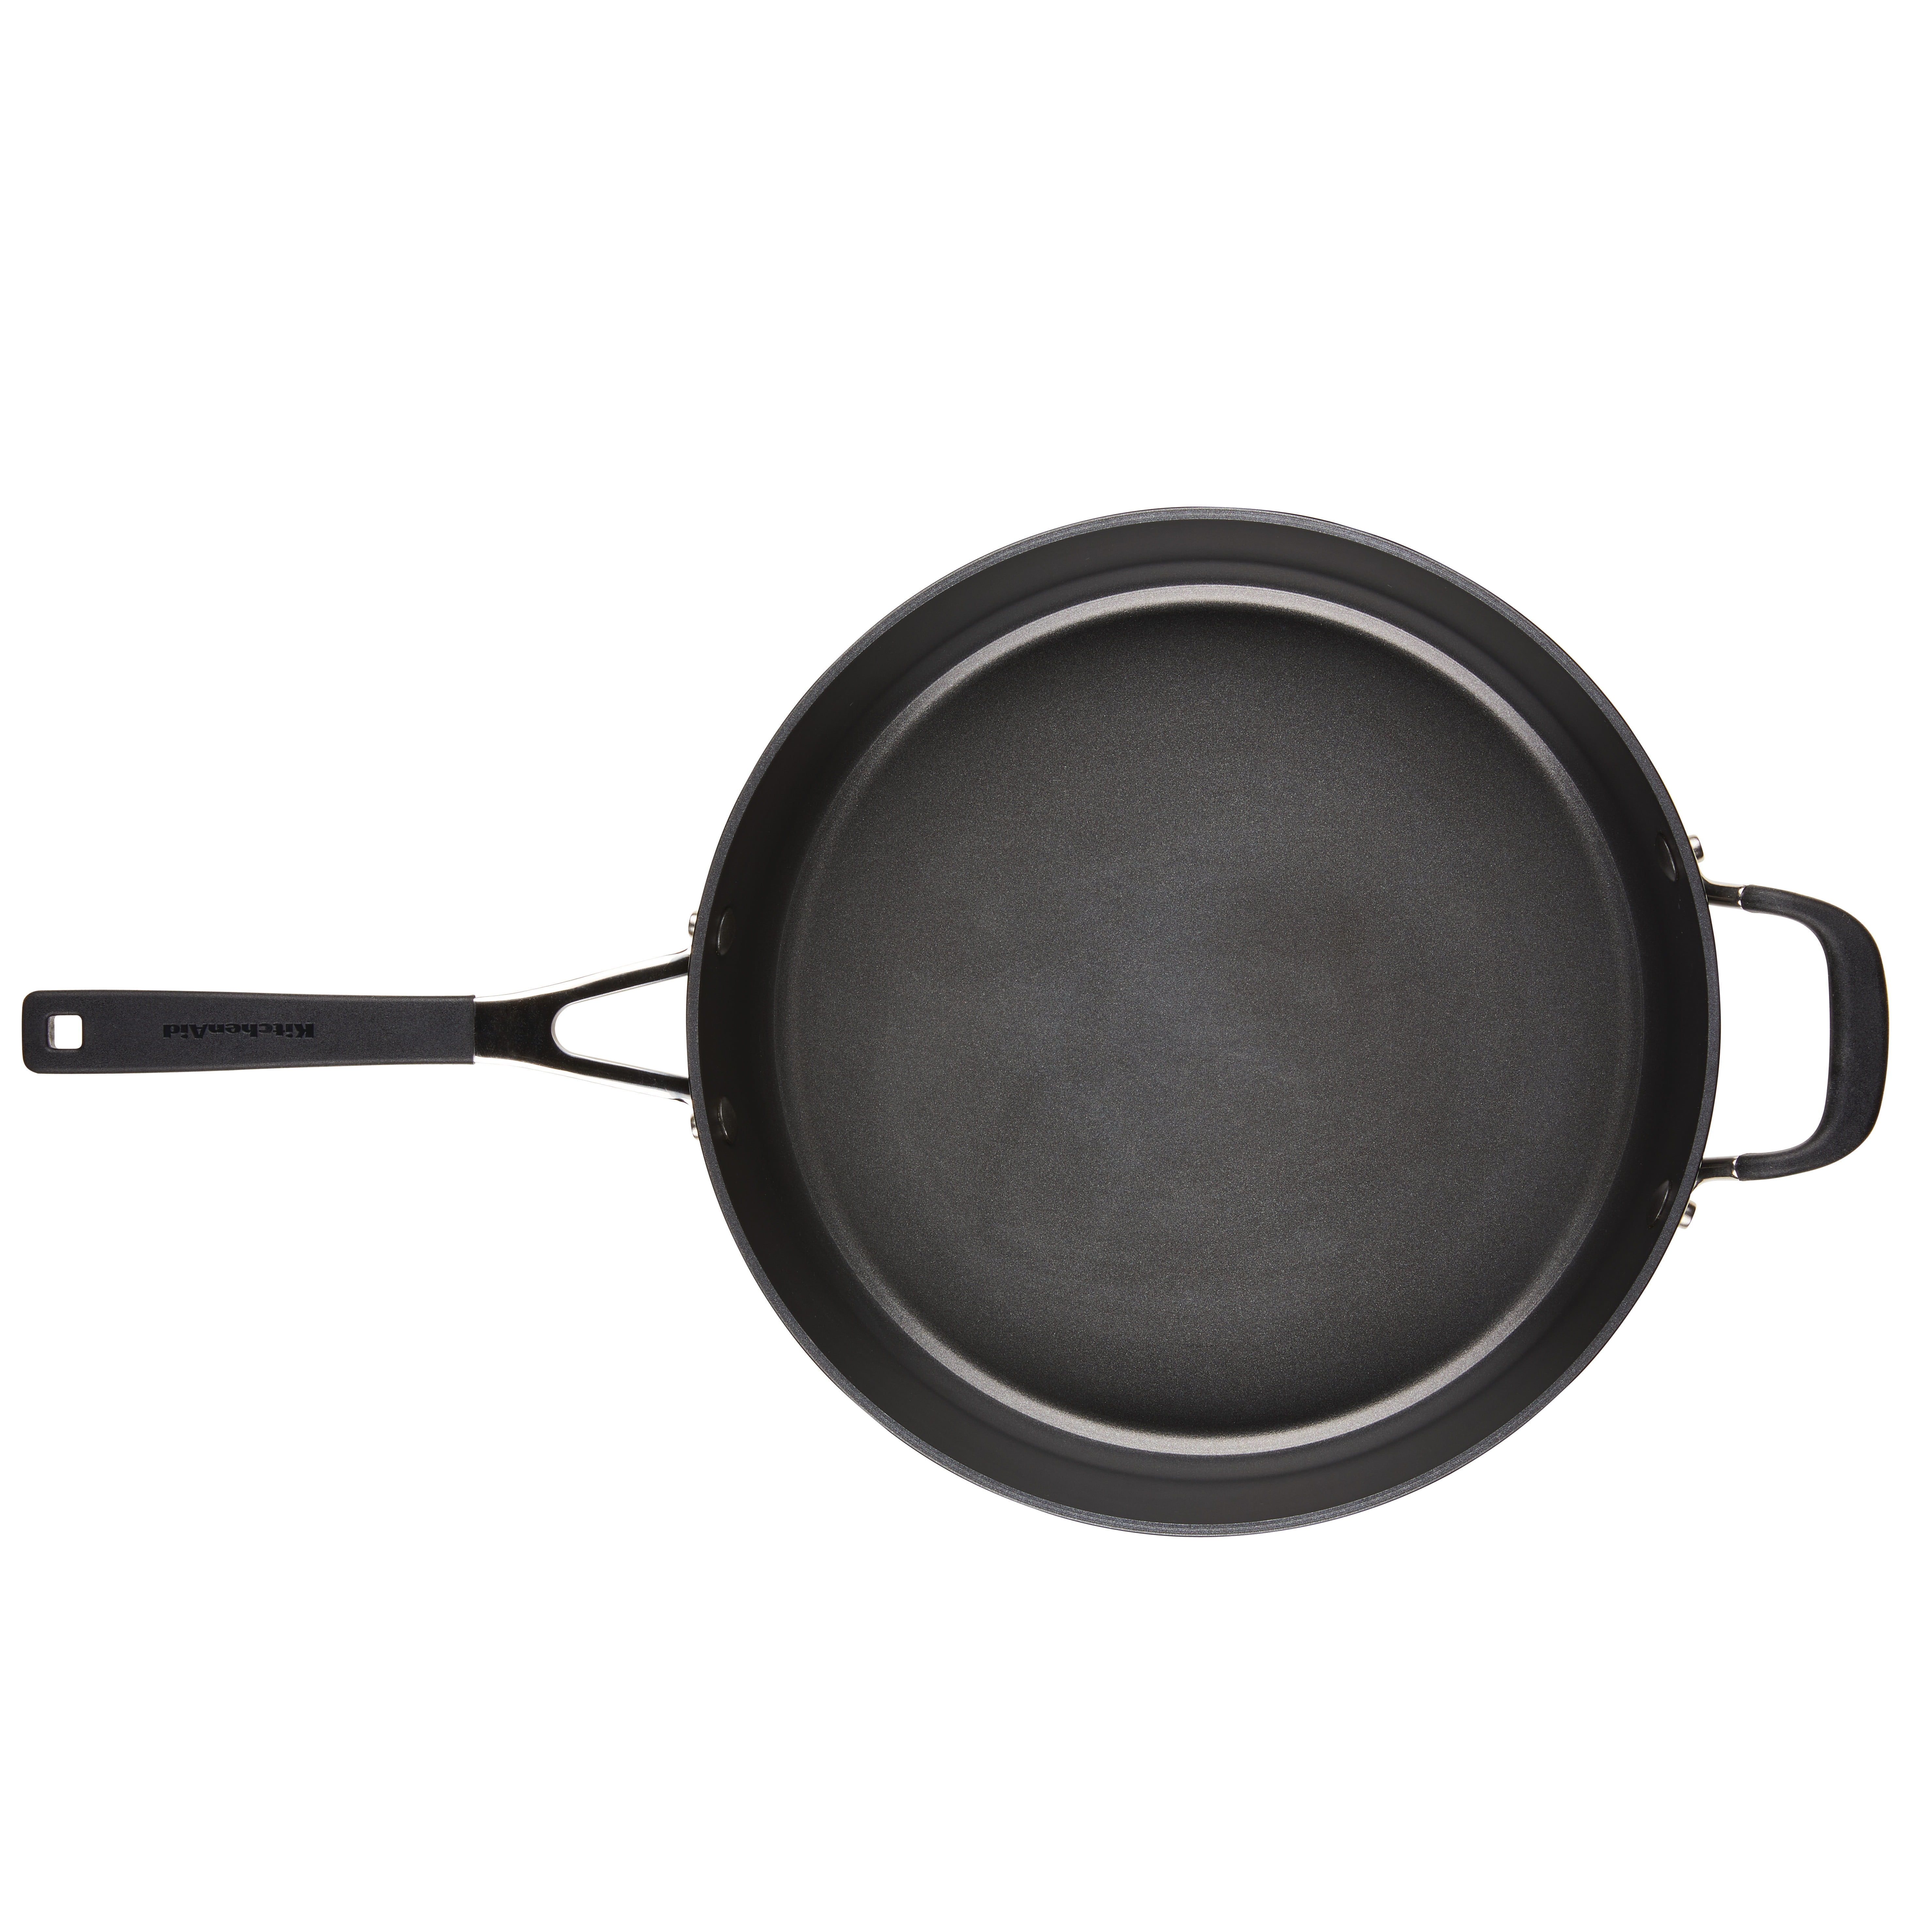 Cook N Home Professional Hard Anodized Nonstick 3 Quart 9.5 inch Saute Pan  With Lid， Stay-Cool Handles , Black 